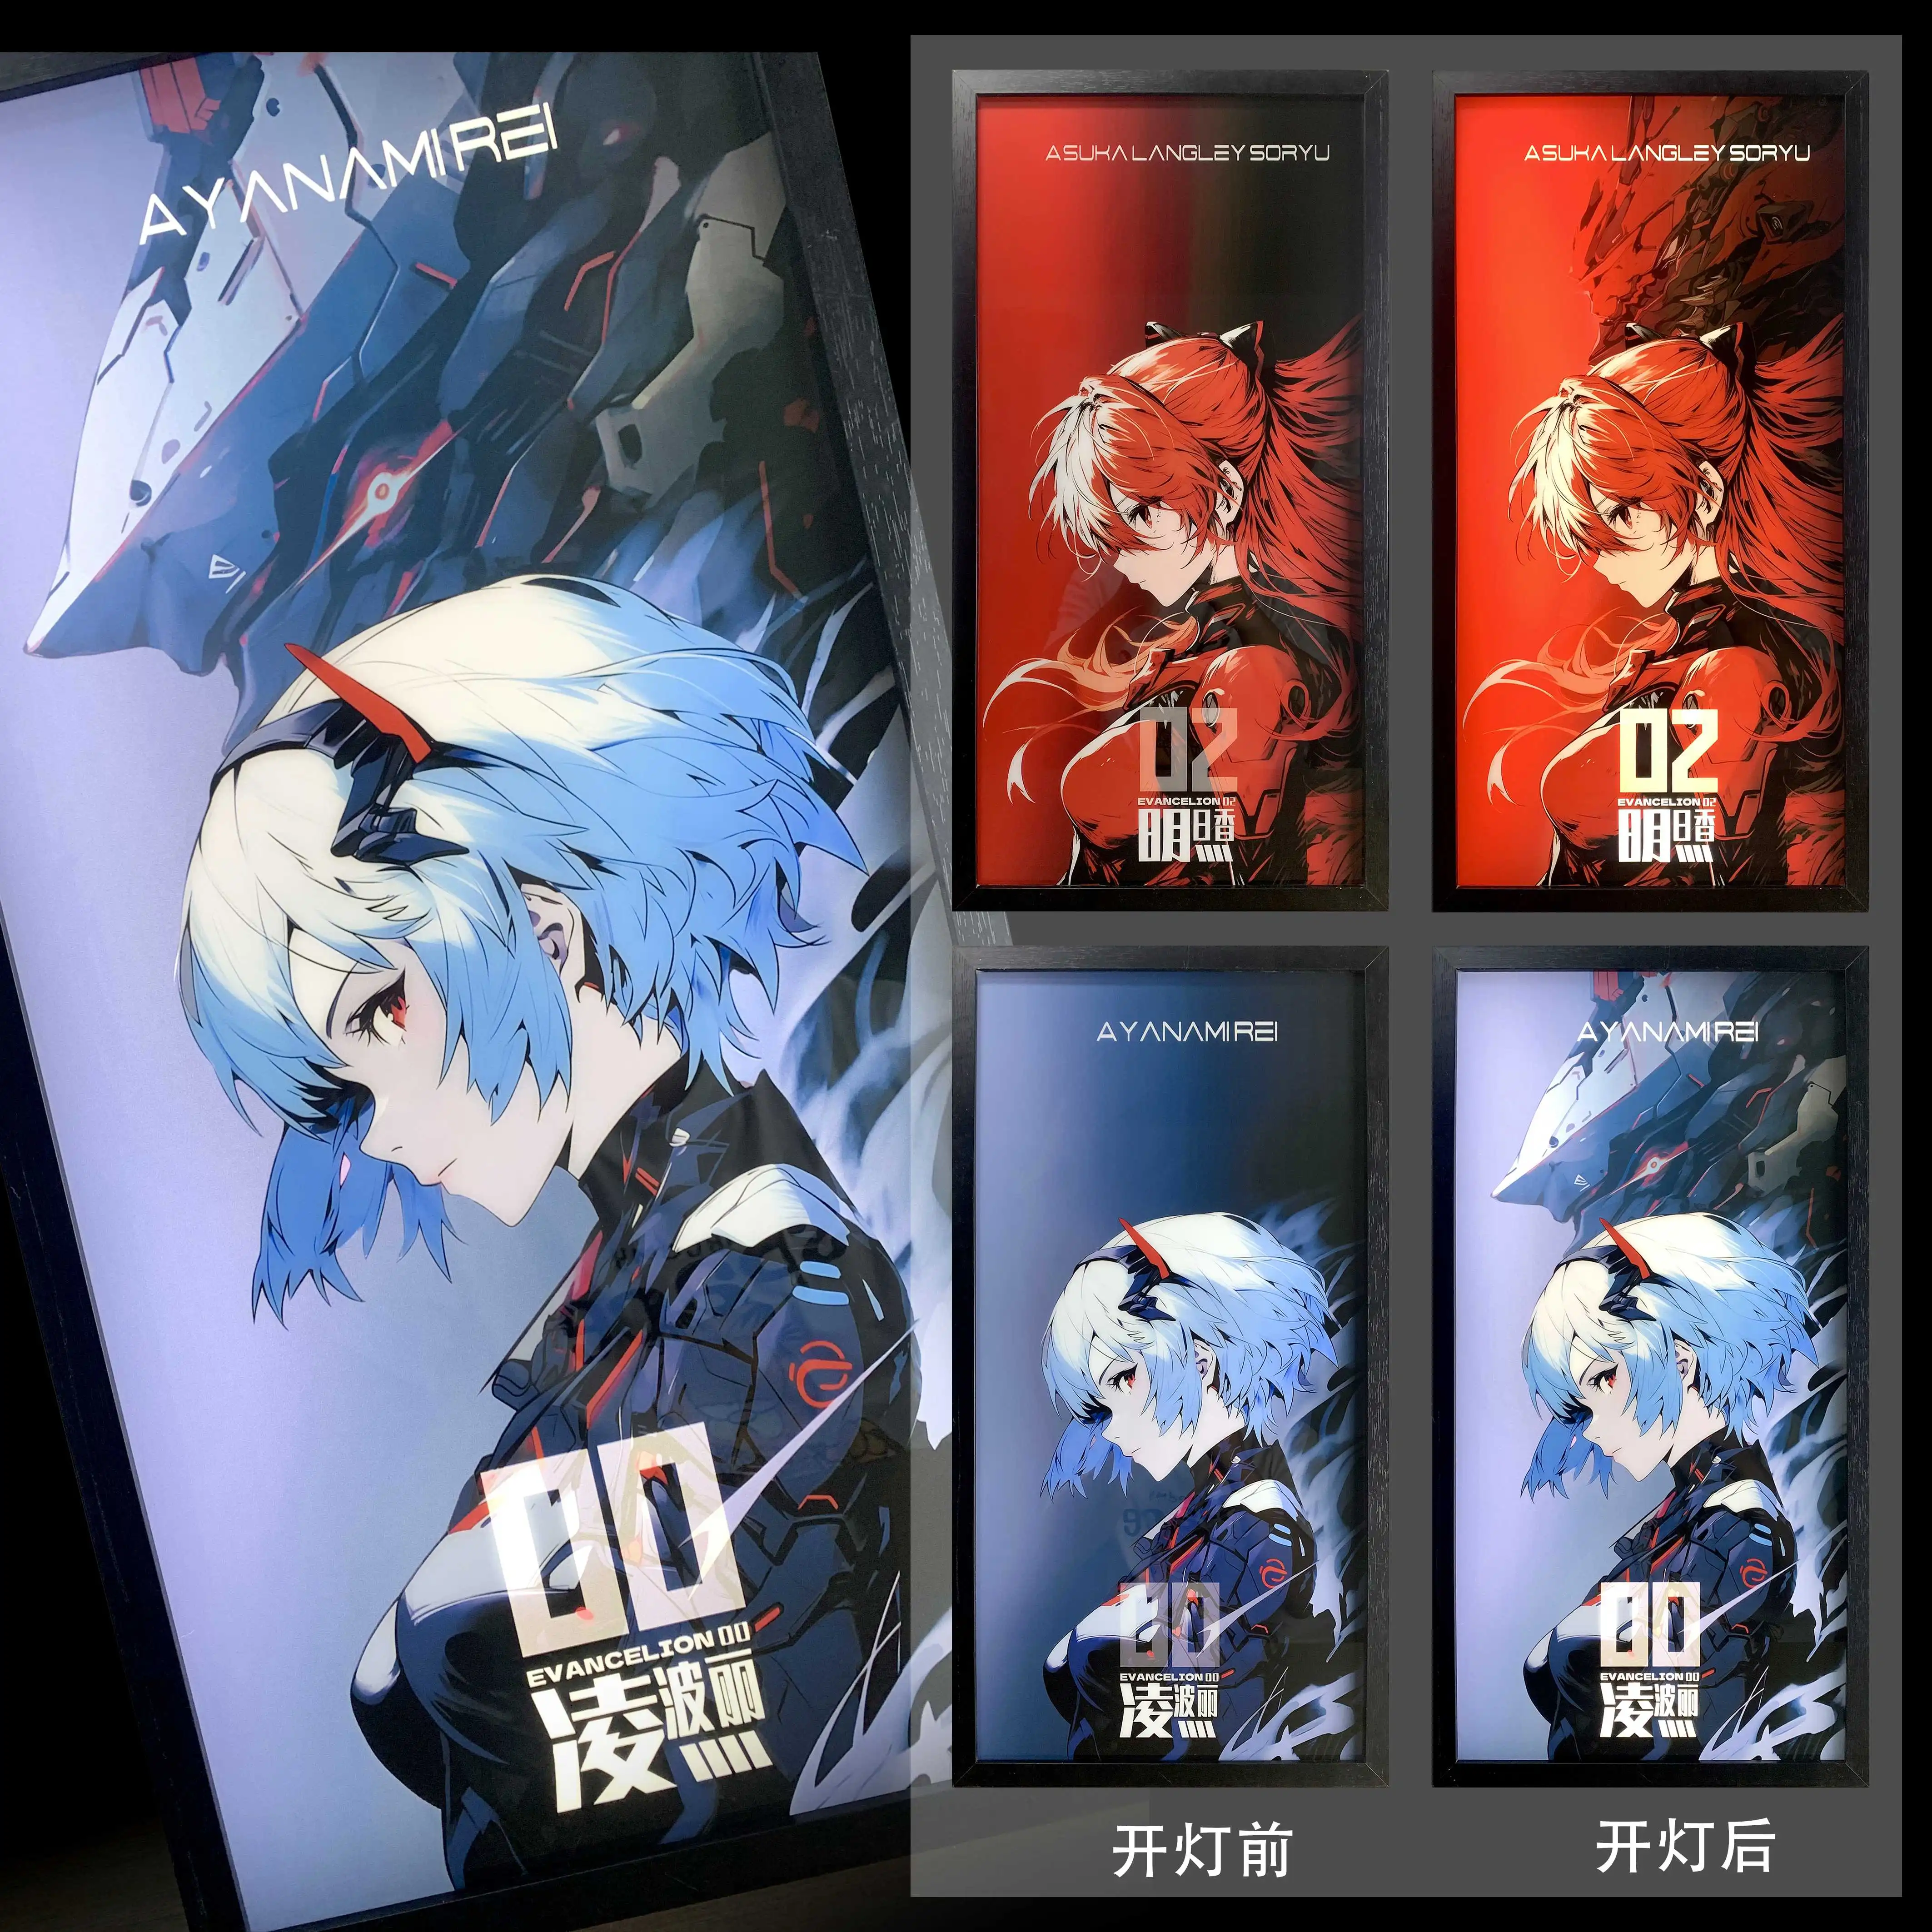 Tokyo Ghoul:re - Part 2 (Blu-ray) for sale online